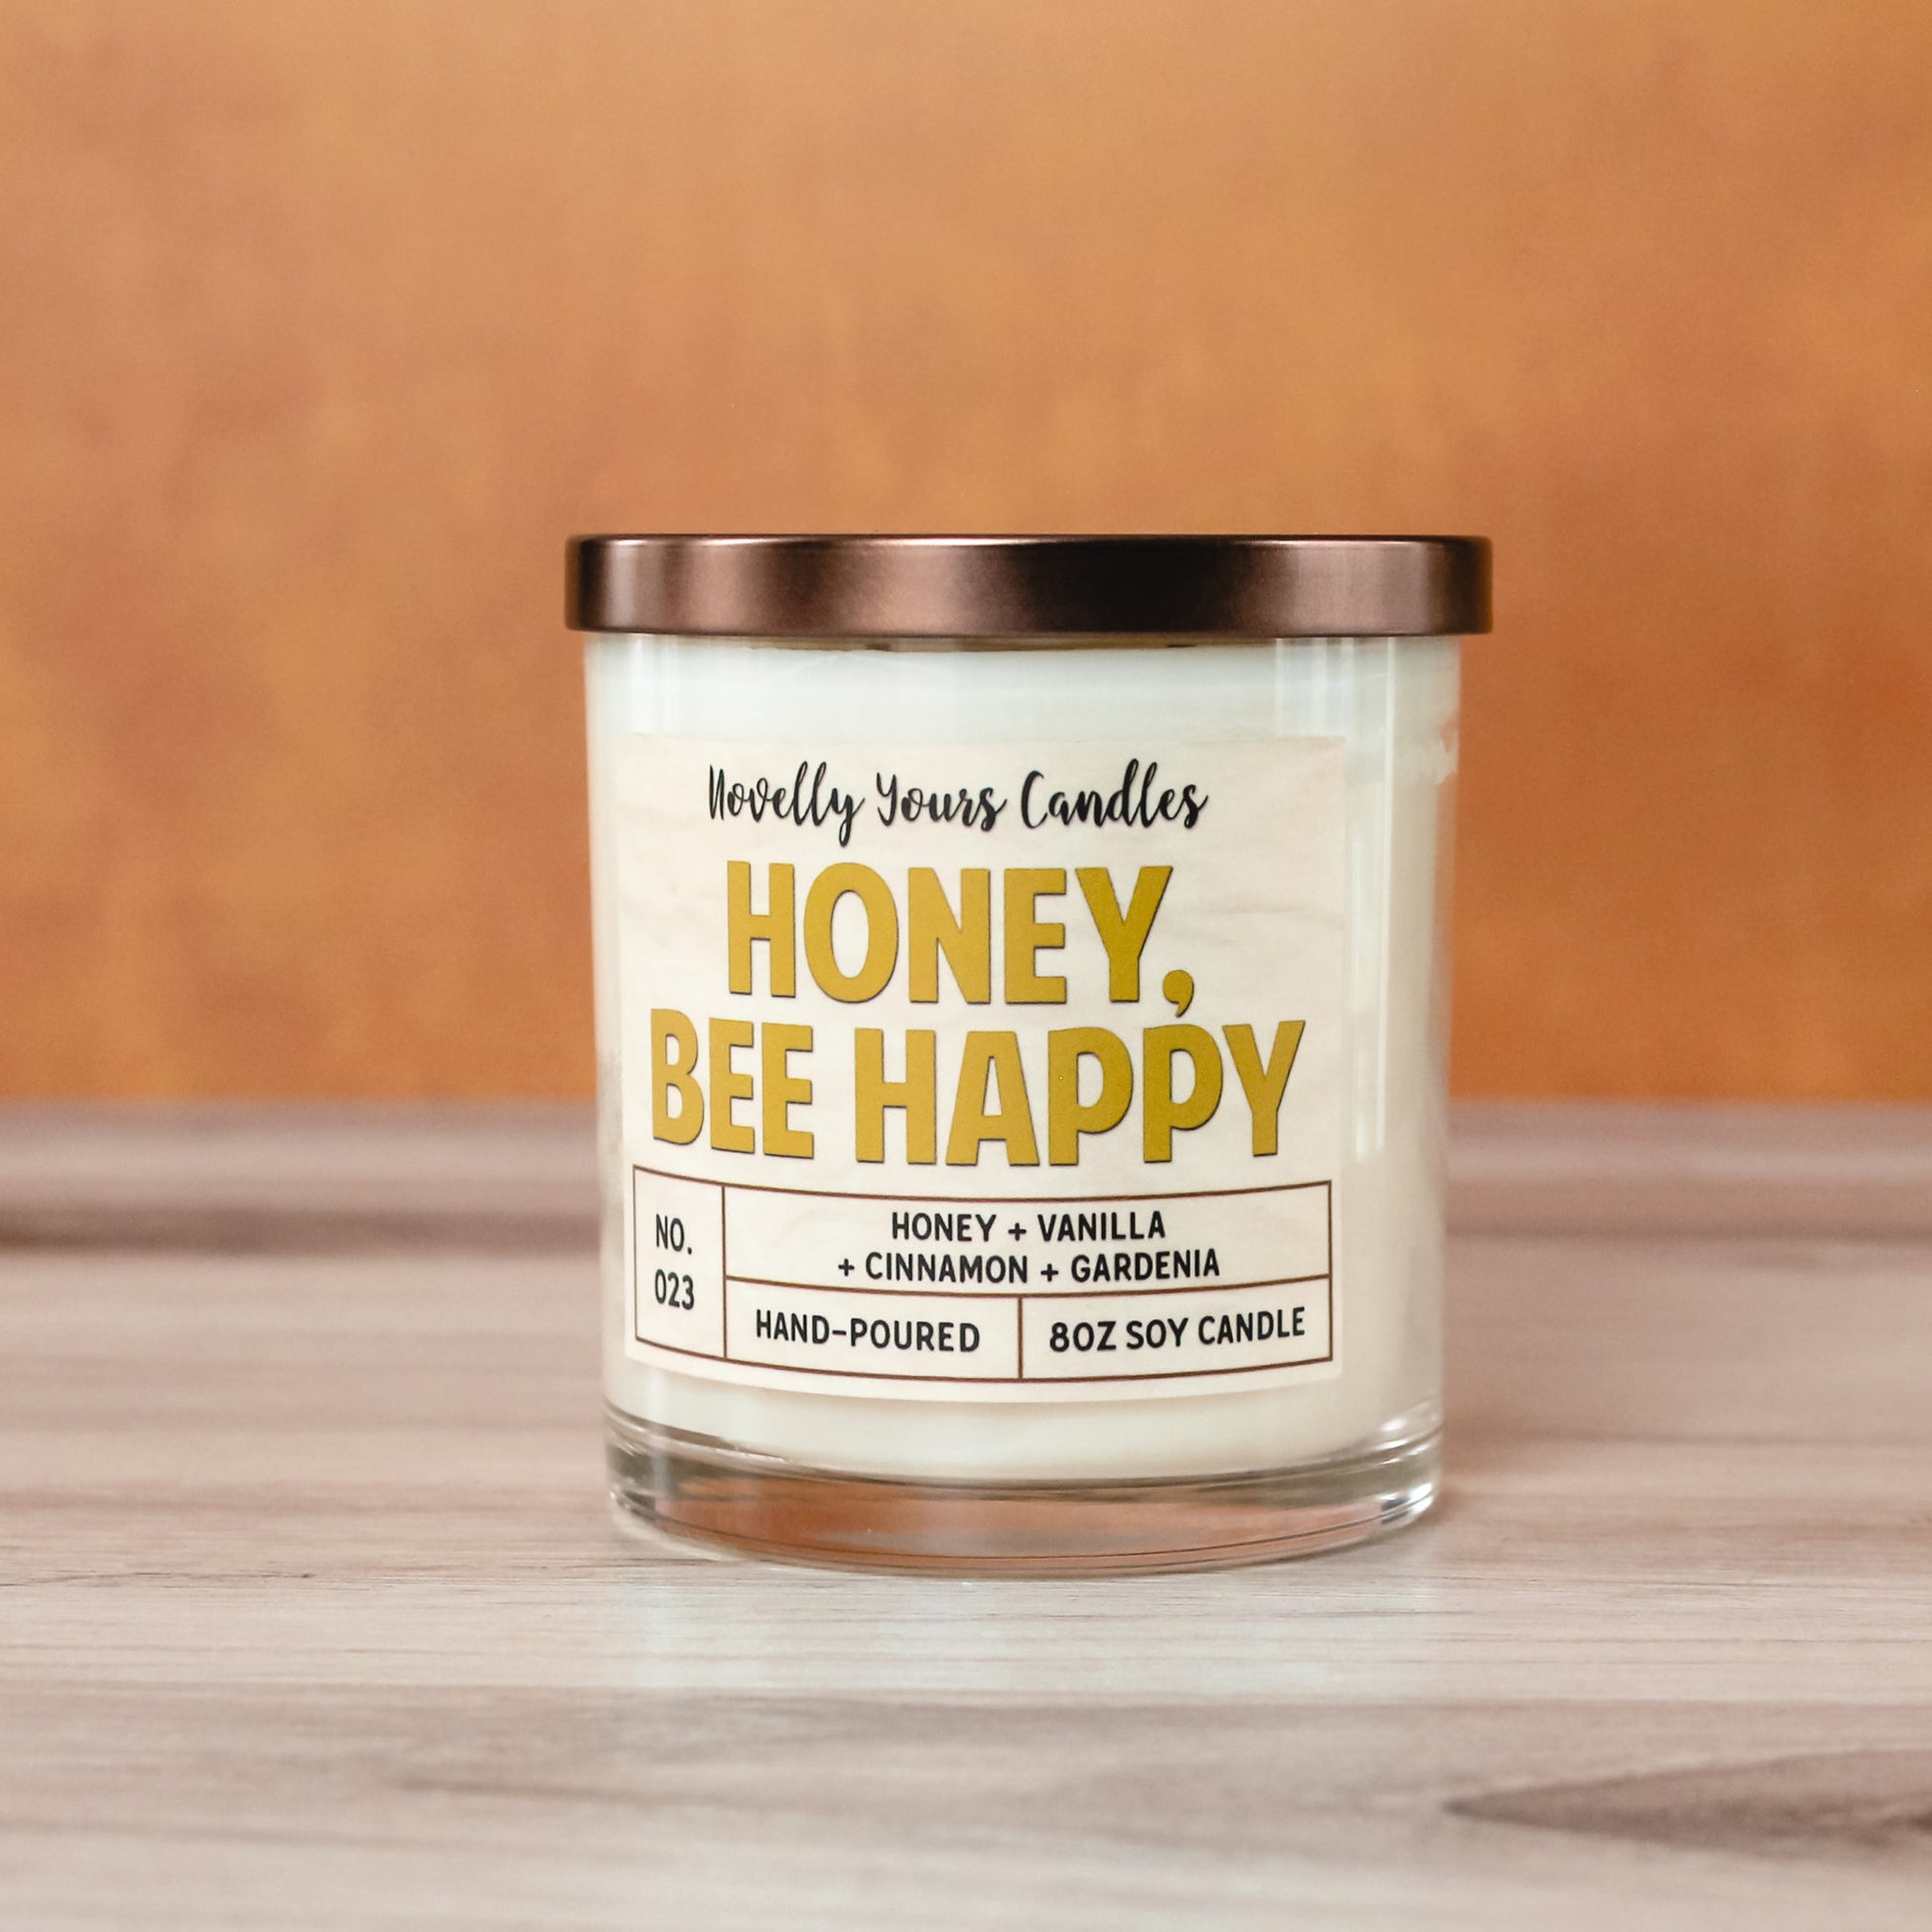 honey bee happy candle in gold honey colored text, candle in glass tumbler jar with bronze lid. Sits on light wood surface with orange background